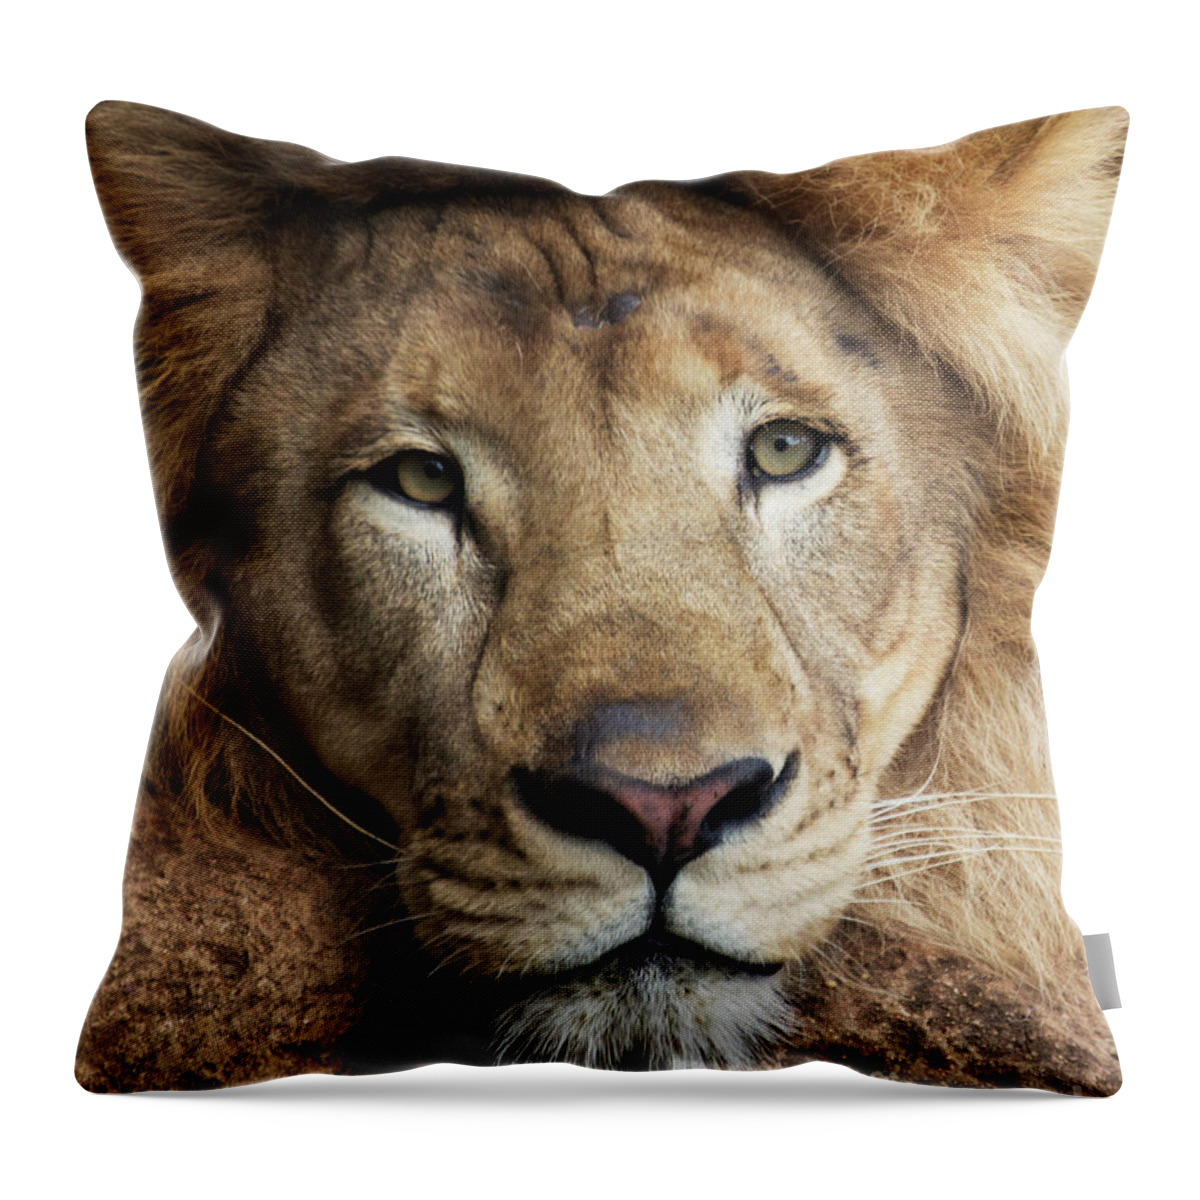 Lion Throw Pillow featuring the photograph Lion close up by Sheila Smart